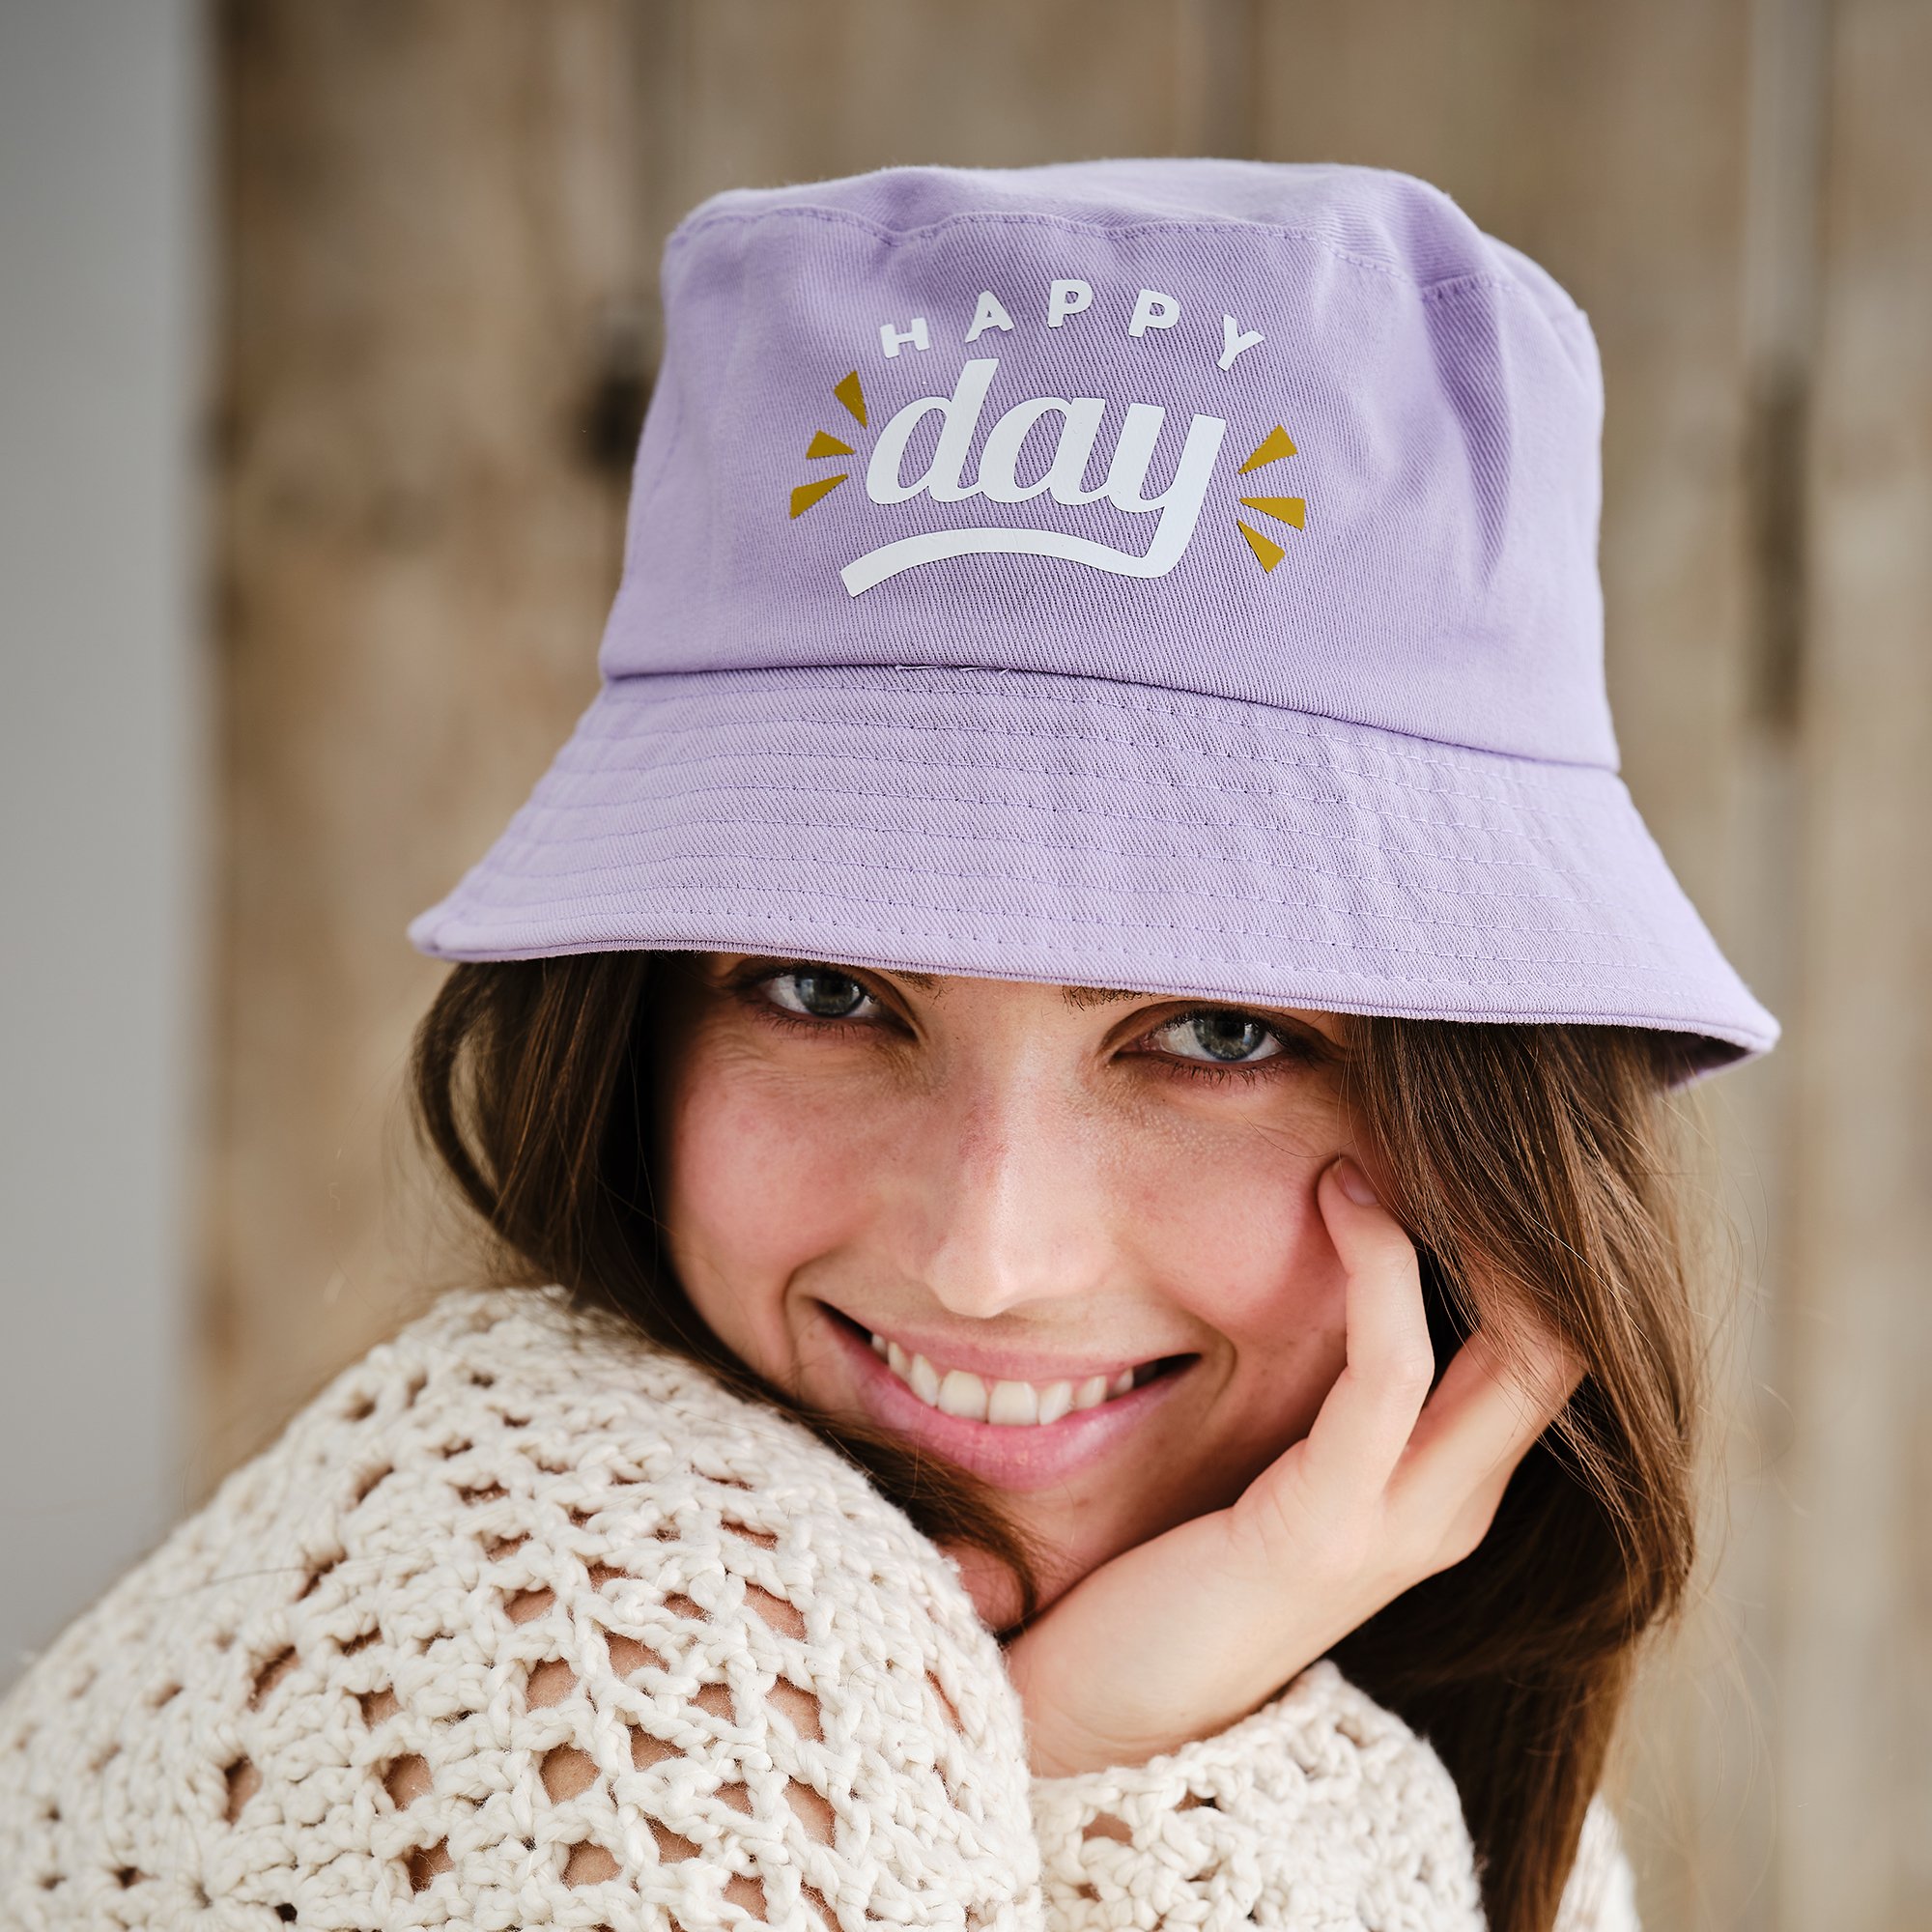 How to Make a Summer Hat with the Cricut Joy - The Happy Scraps